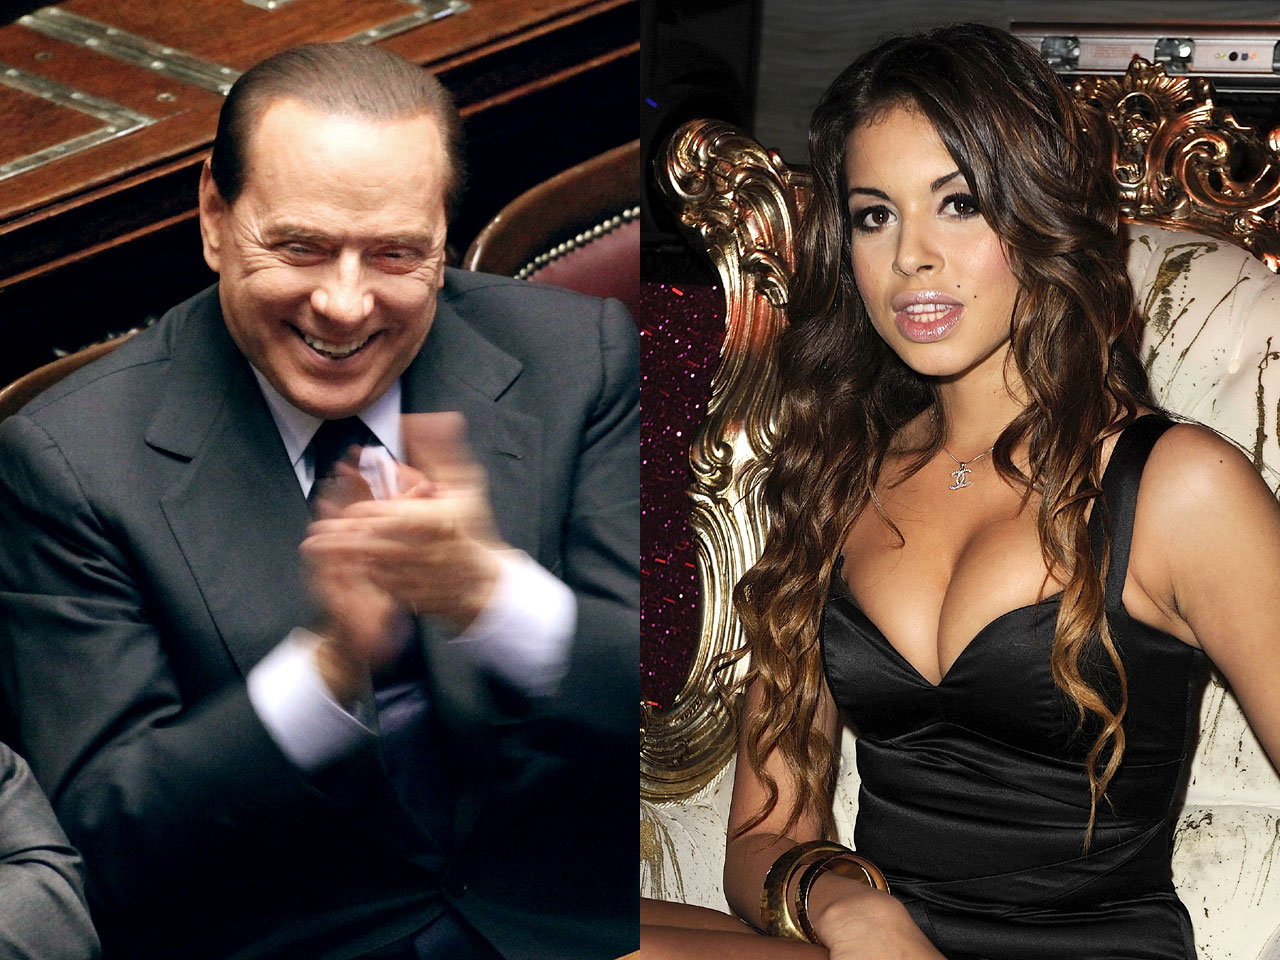 Silvio Berlusconi Loses Bid To Have Prostitution Trial Delayed Until After Italy Elections Cbs